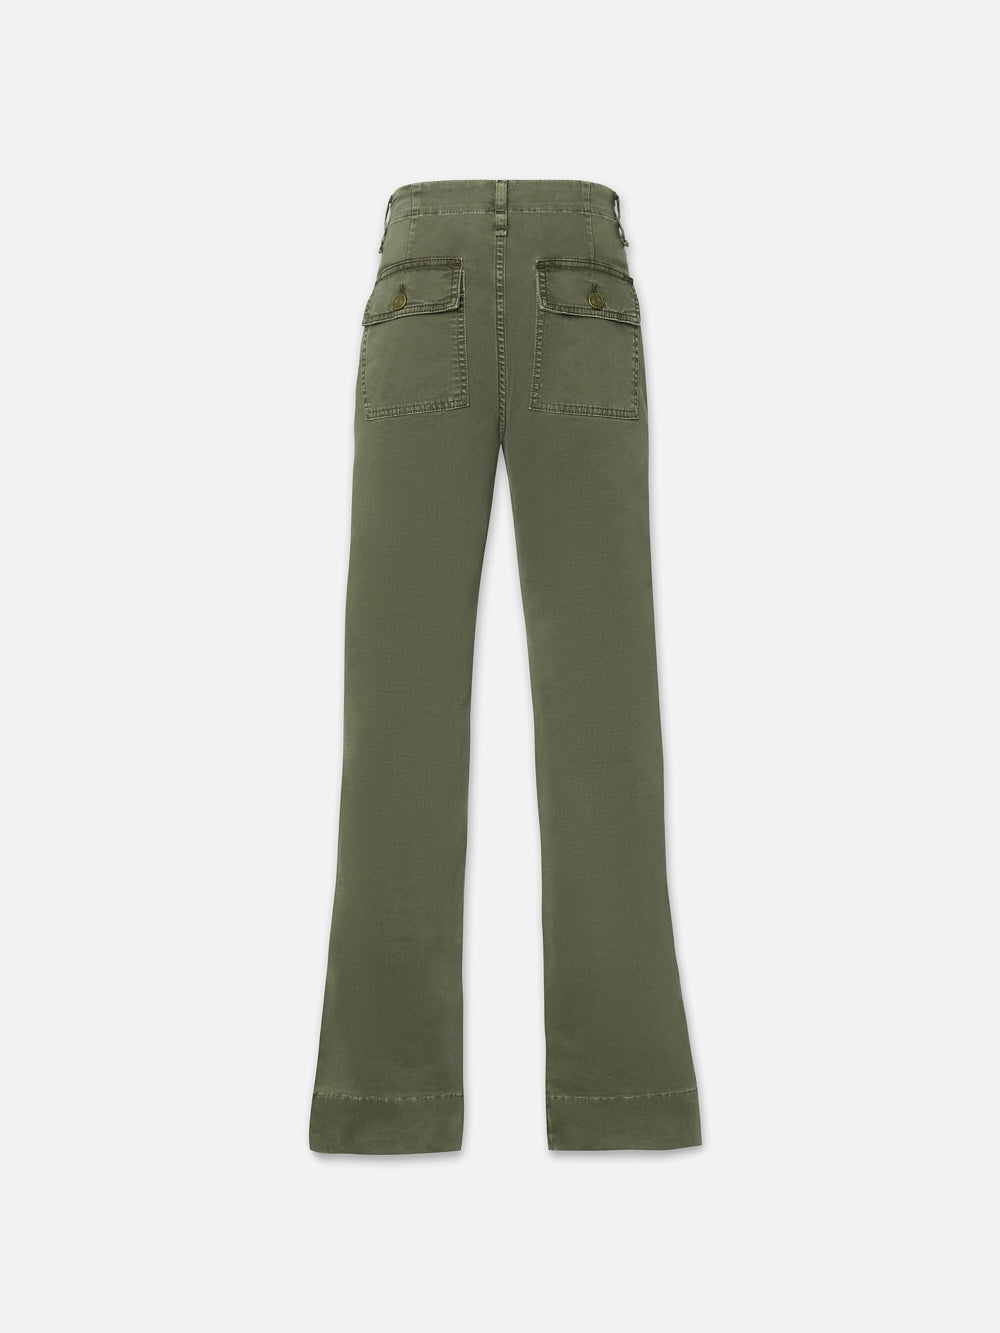 The Utility Slim Stacked in Washed Surplus - 3